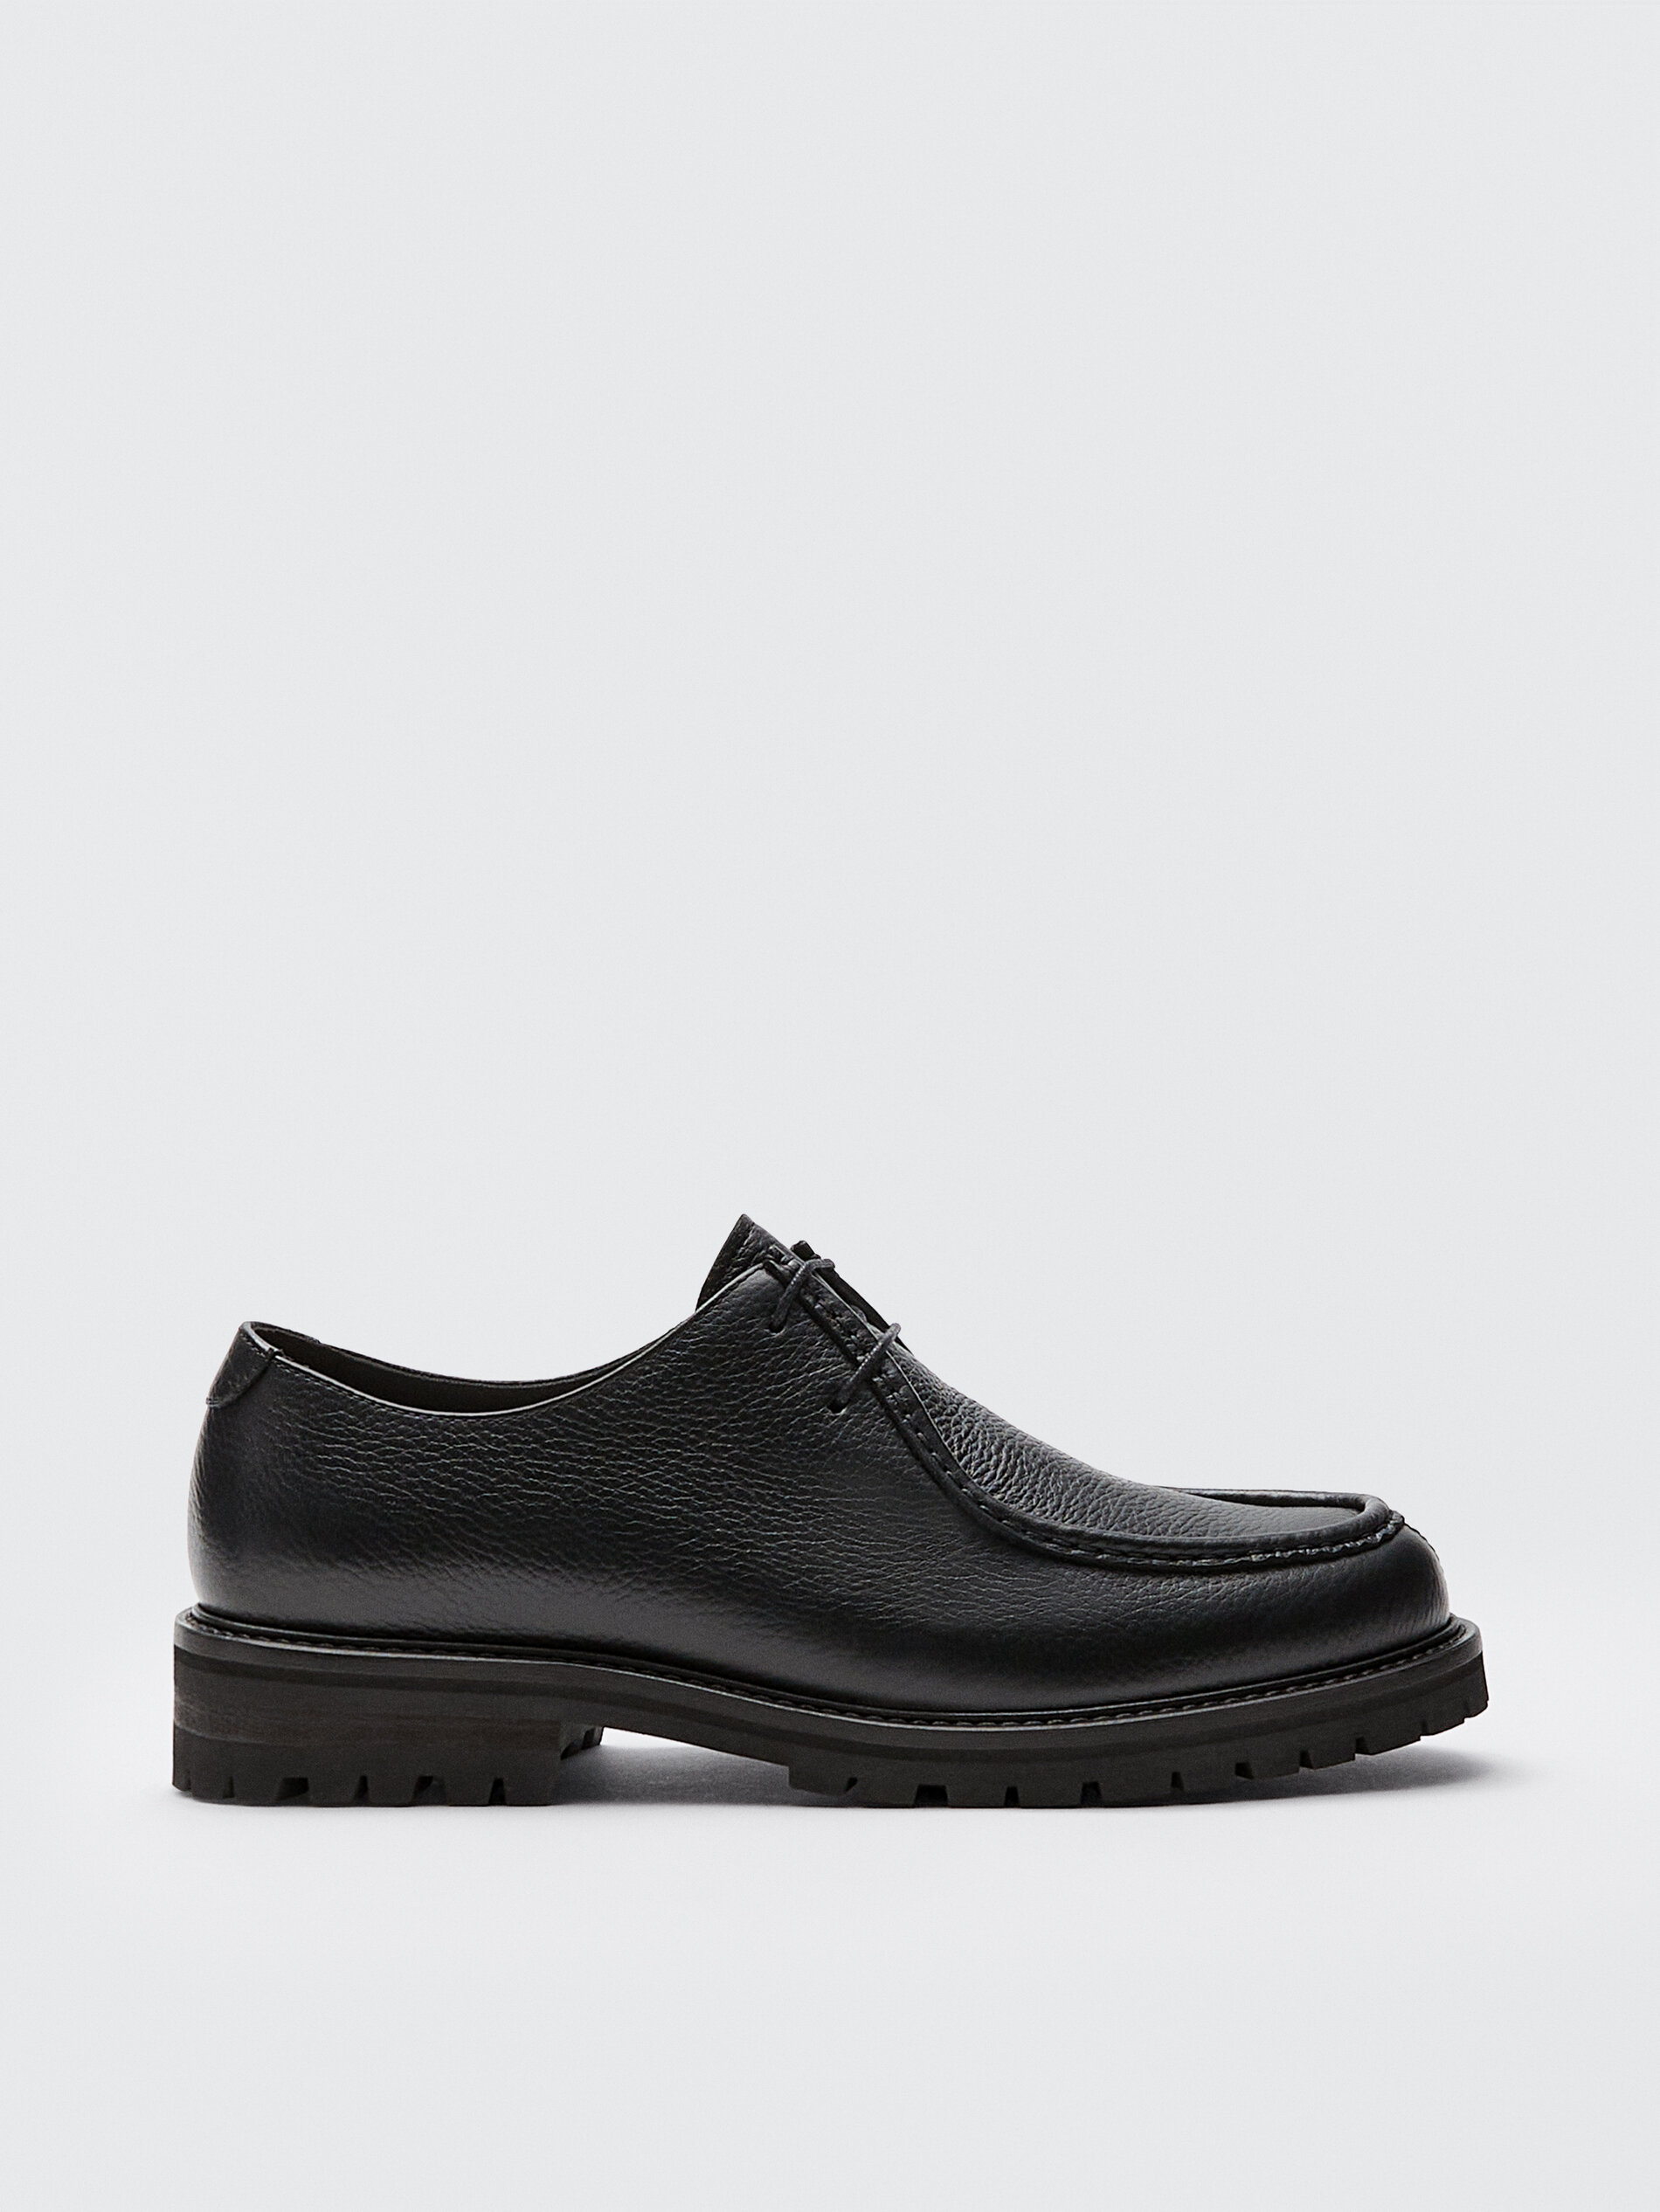 BLACK NAPPA LEATHER SHOES 